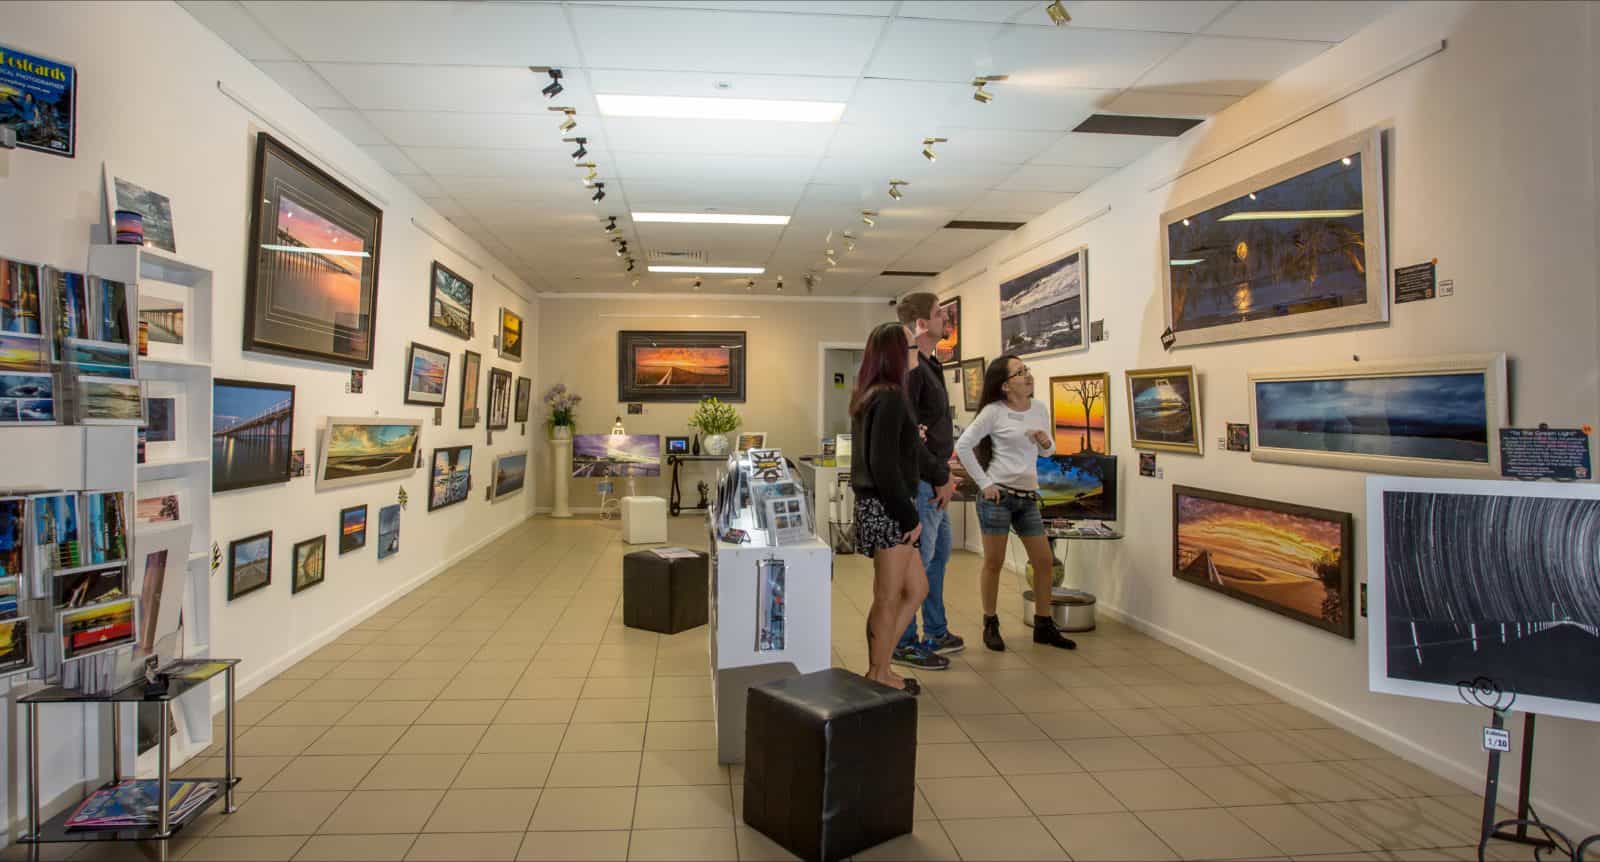 Inside the Gallery and Souvenir Shop